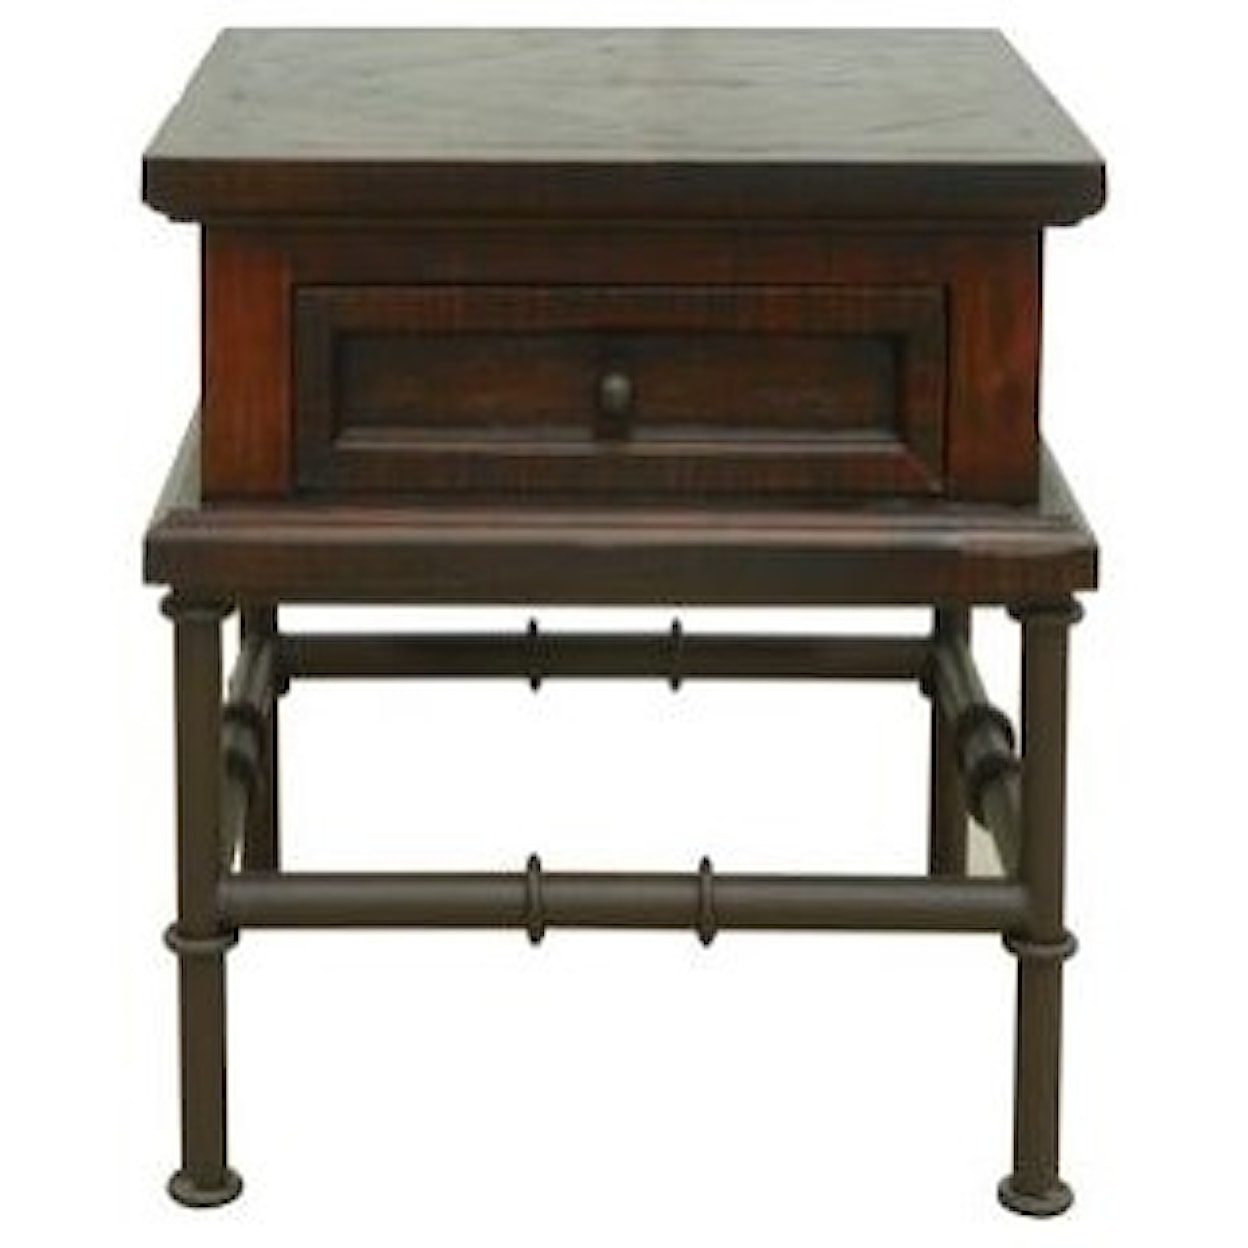 Furniture Source International Occasional Tables End Table